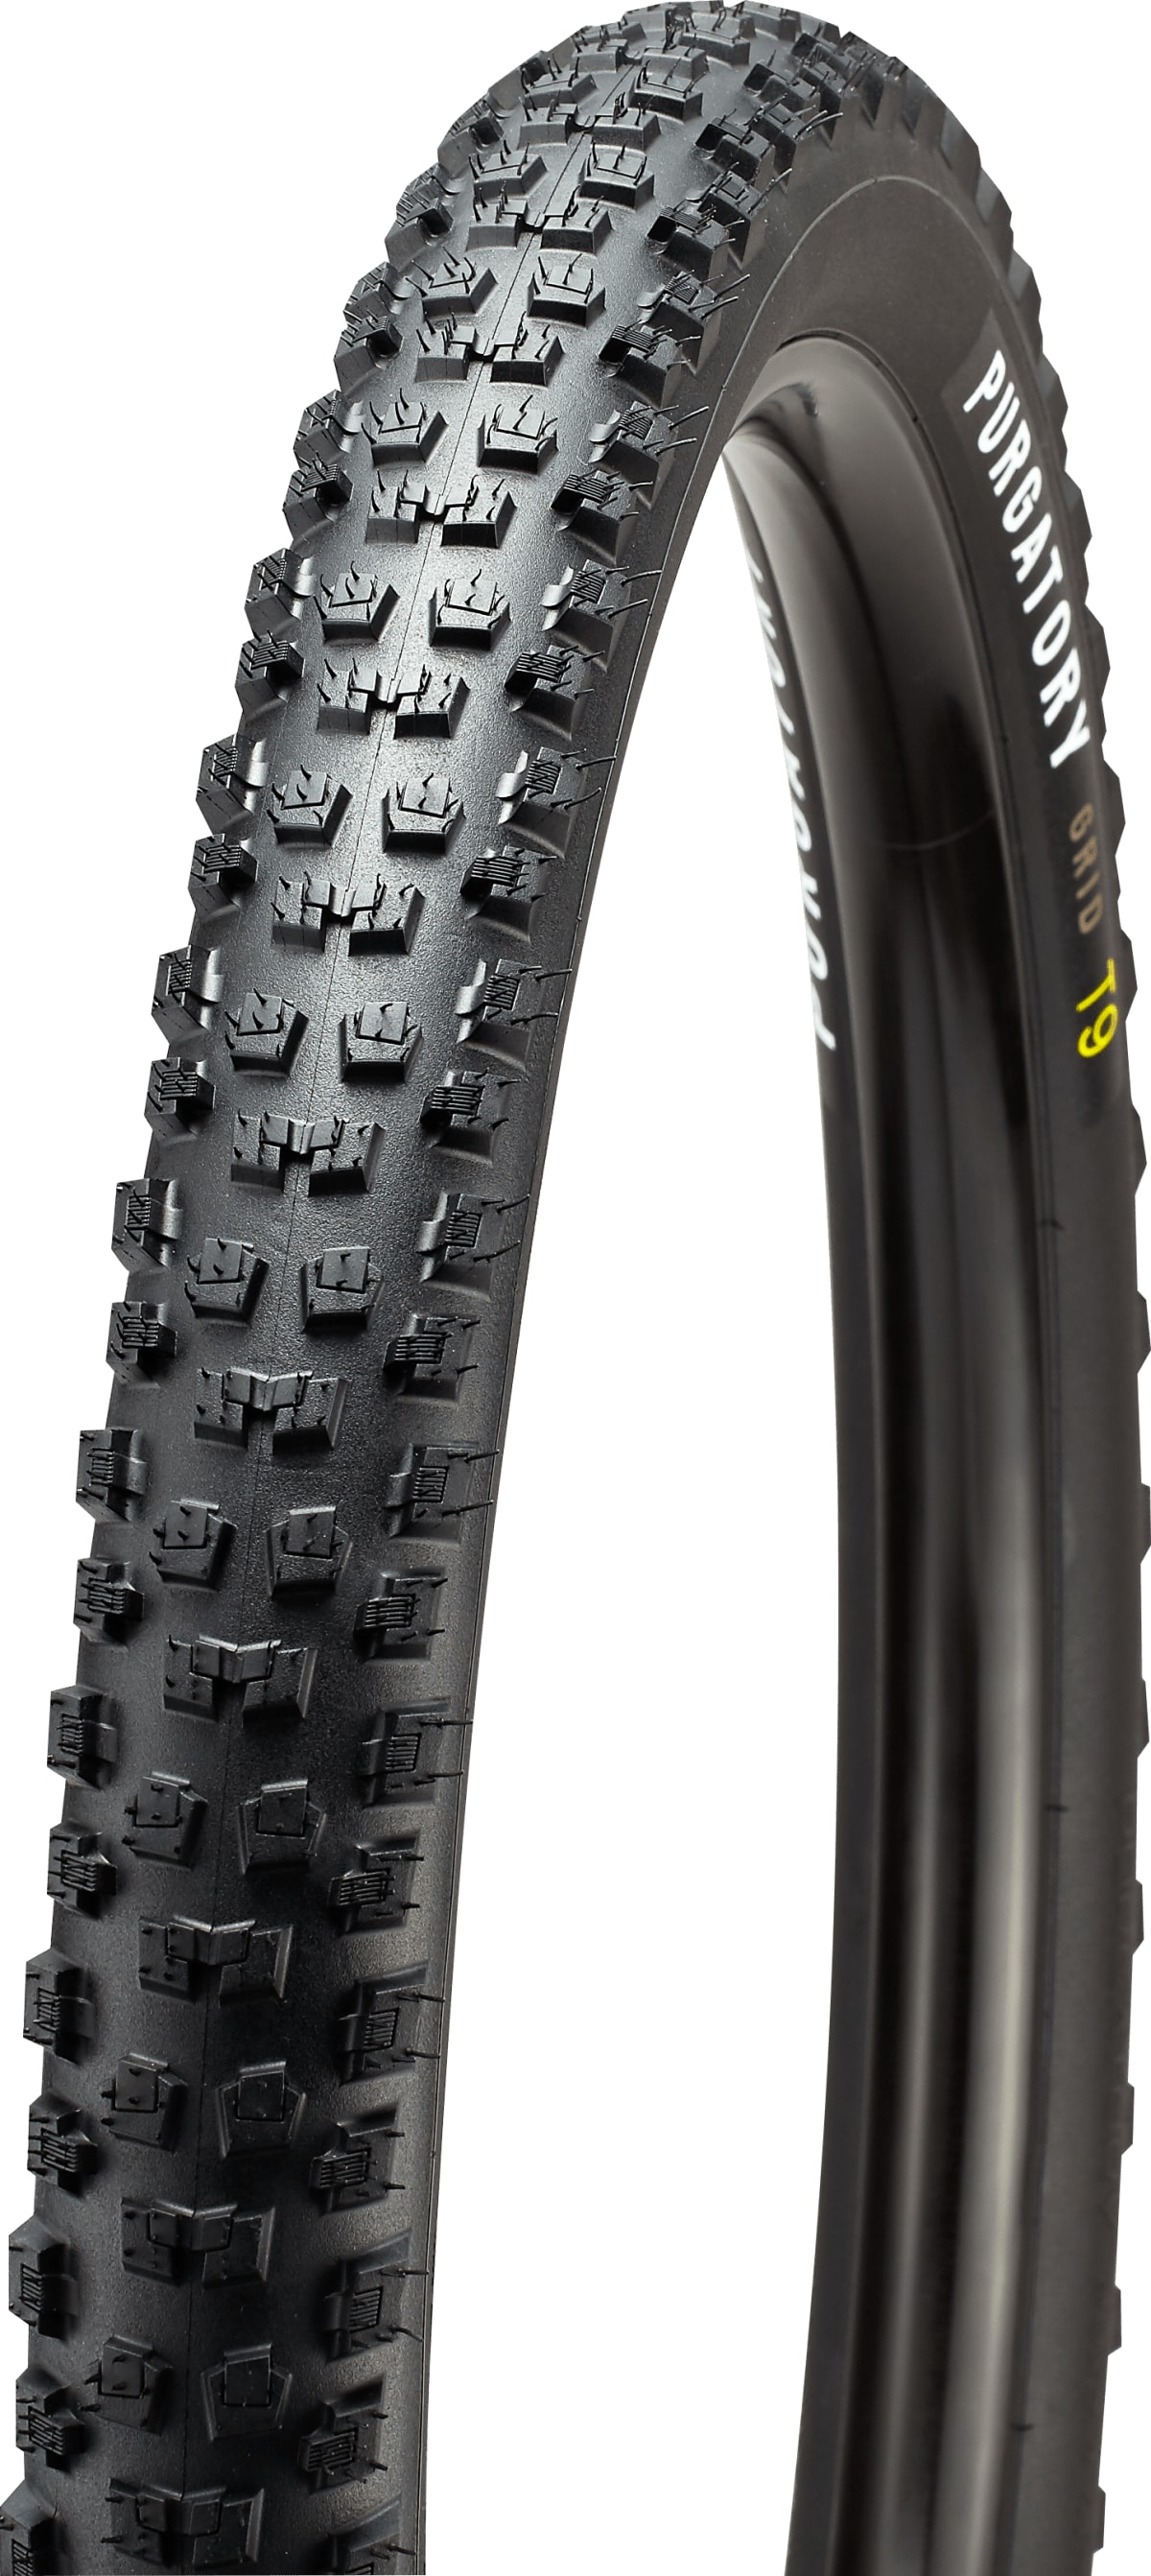 Cycles UK Specialized  Purgatory Grid 2Bliss Ready T9 Mountain Bike Tyre 29 x 2.4 Black